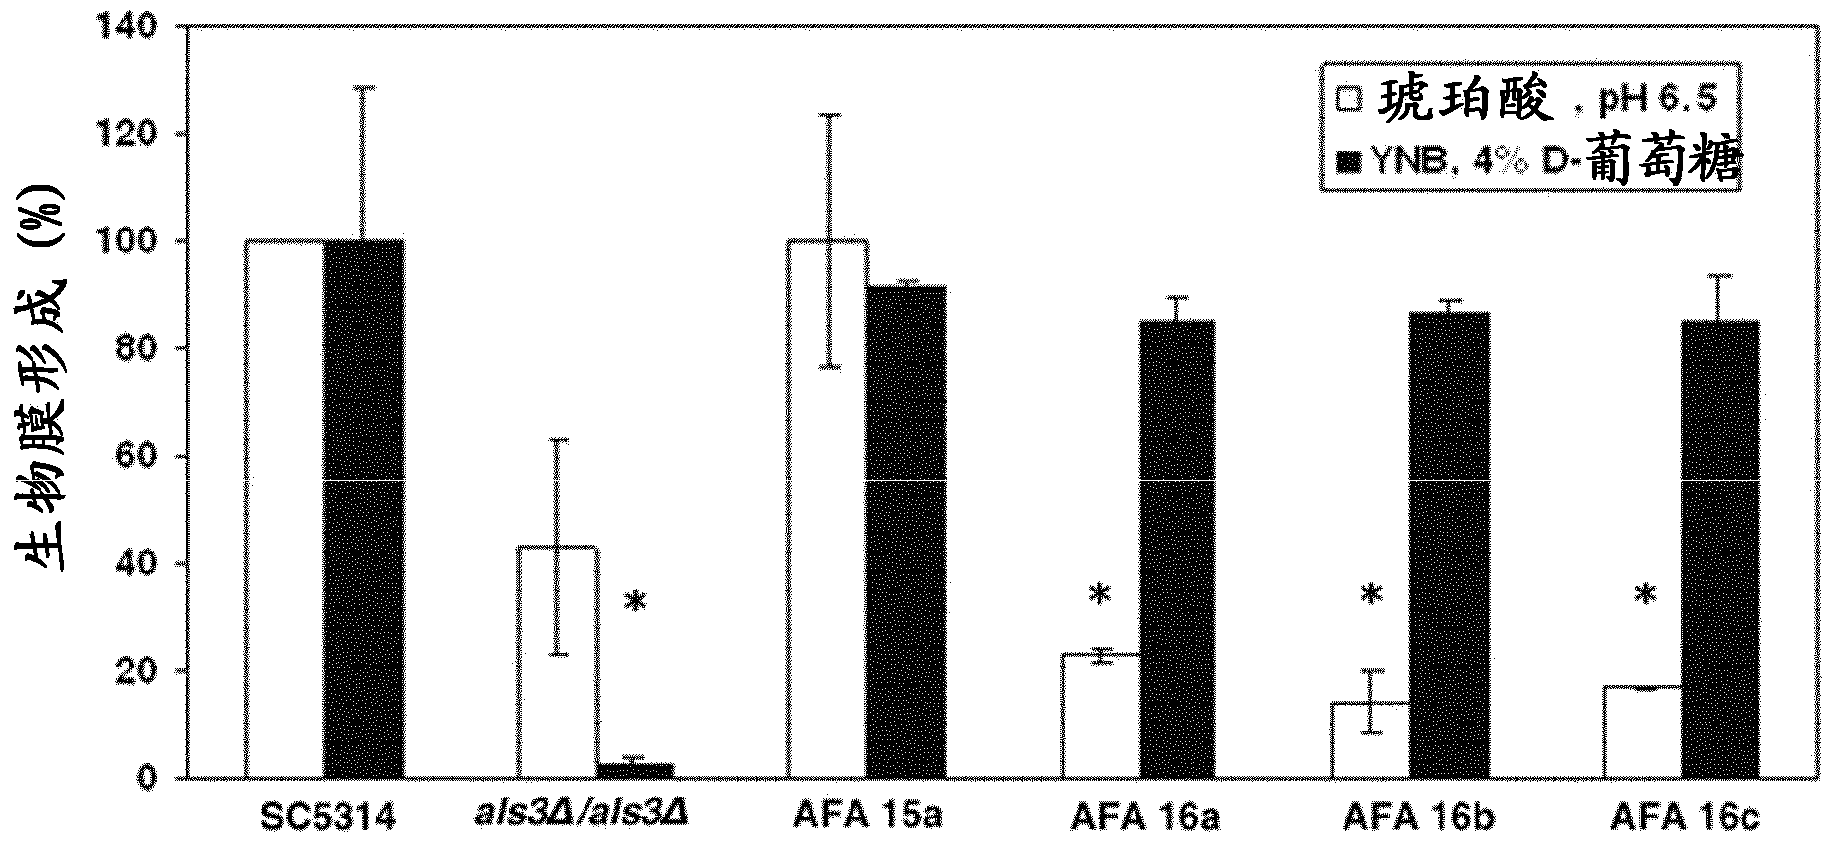 Molecules and methods for inhibition and detection of proteins